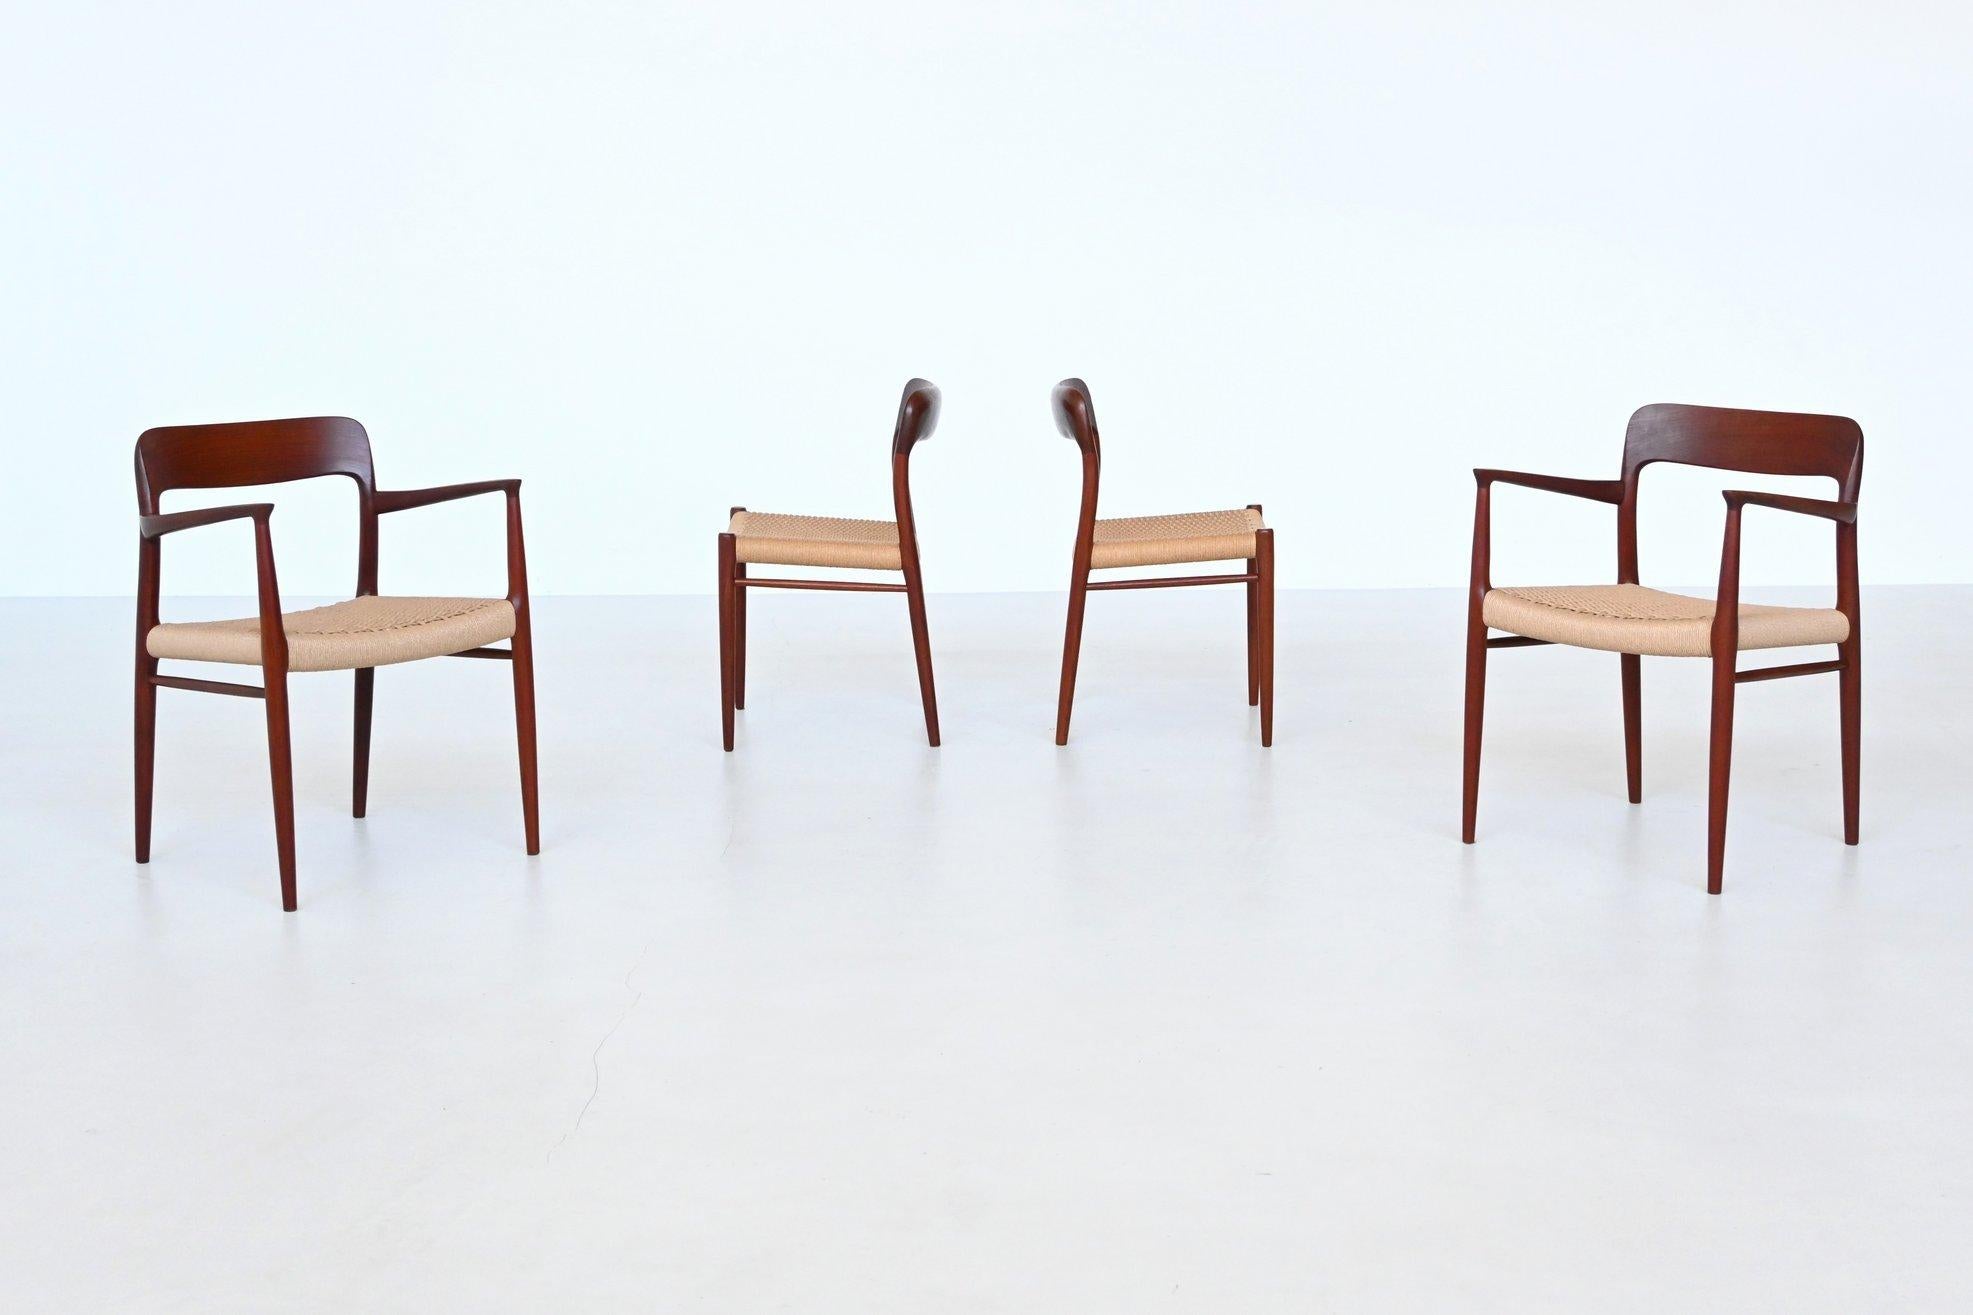 Very nice set of four dining chairs model 56 and 75 designed by Niels Otto Møller and manufactured by J.L. Møller Mobelfabrik, Denmark 1954. These iconic chairs are made of solid teak and have original paper cord seats. The back legs are slightly